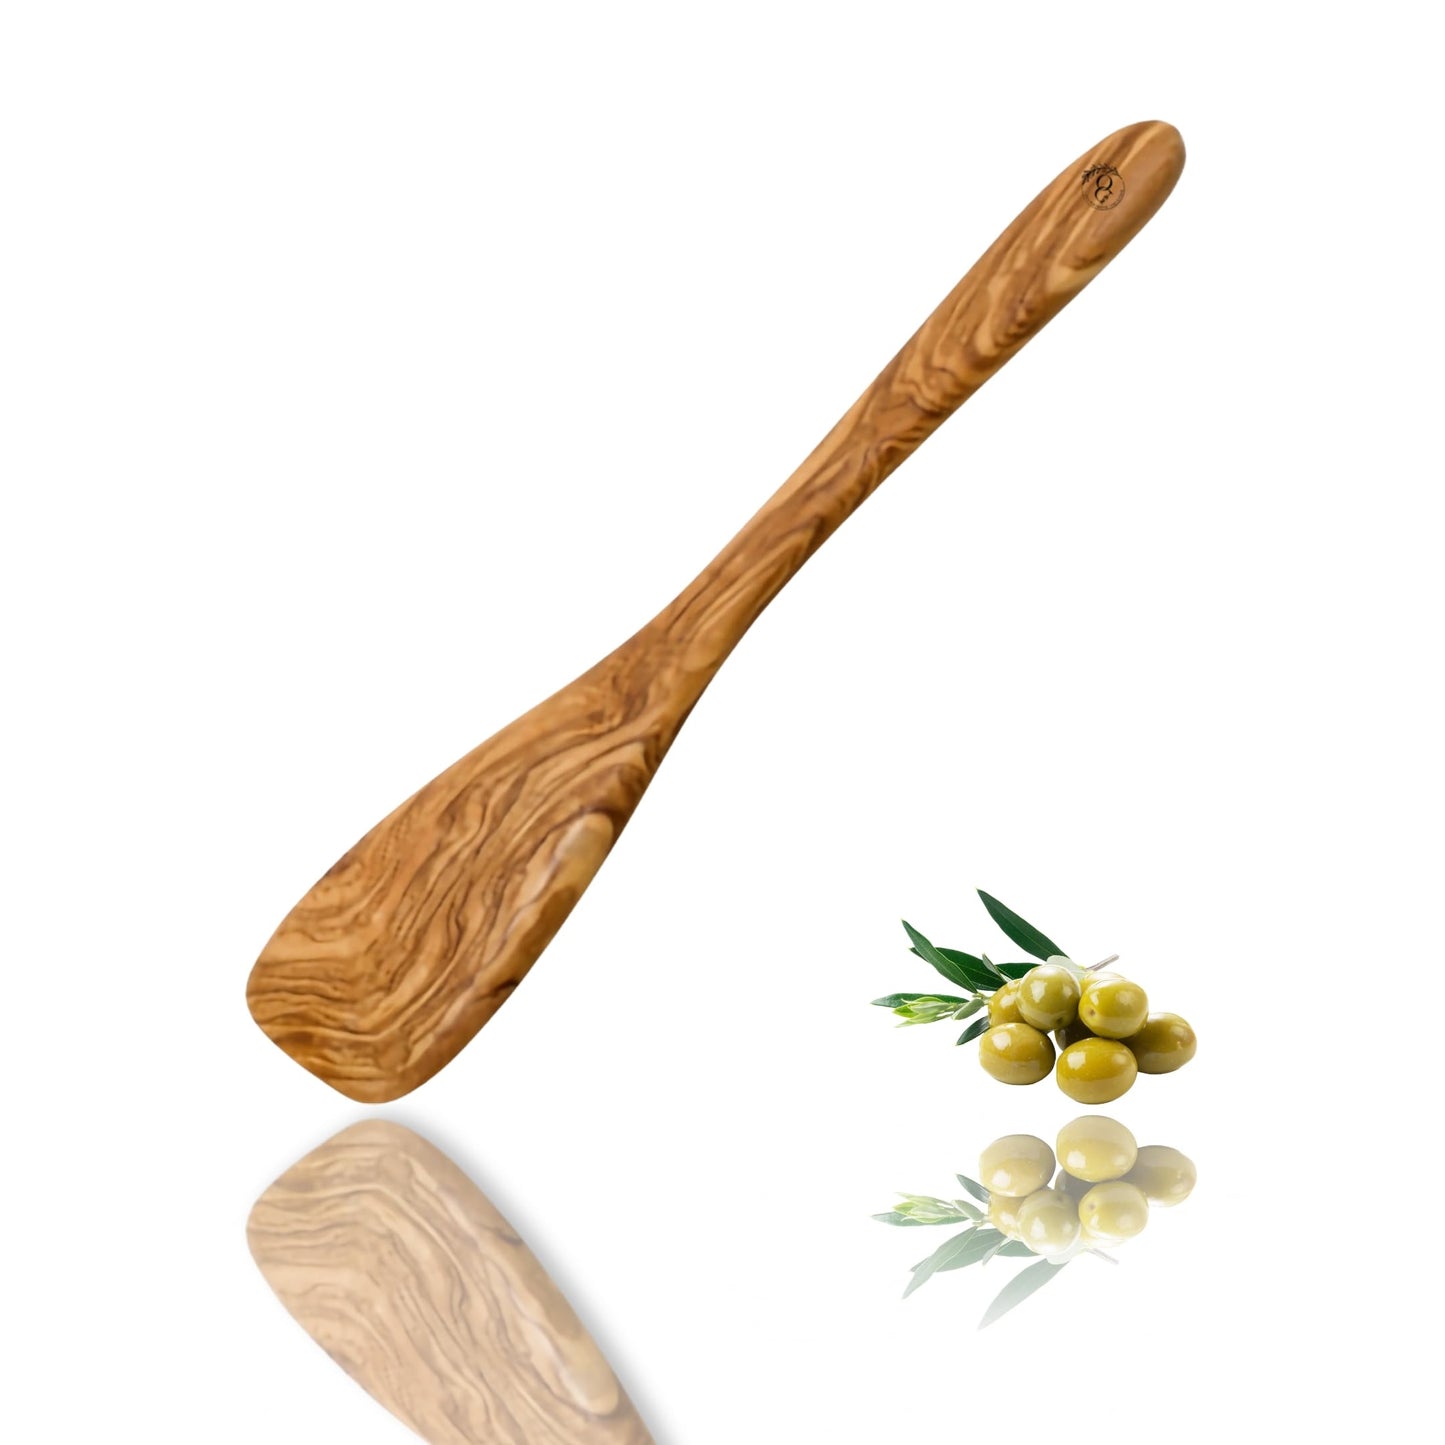 12 inch Wooden Spatula Turner for Cooking Olive Wood Handmade Safe Nonstick cookware Kitchen Utensils Sturdy Flipping Eggs, Fish, Chopper,